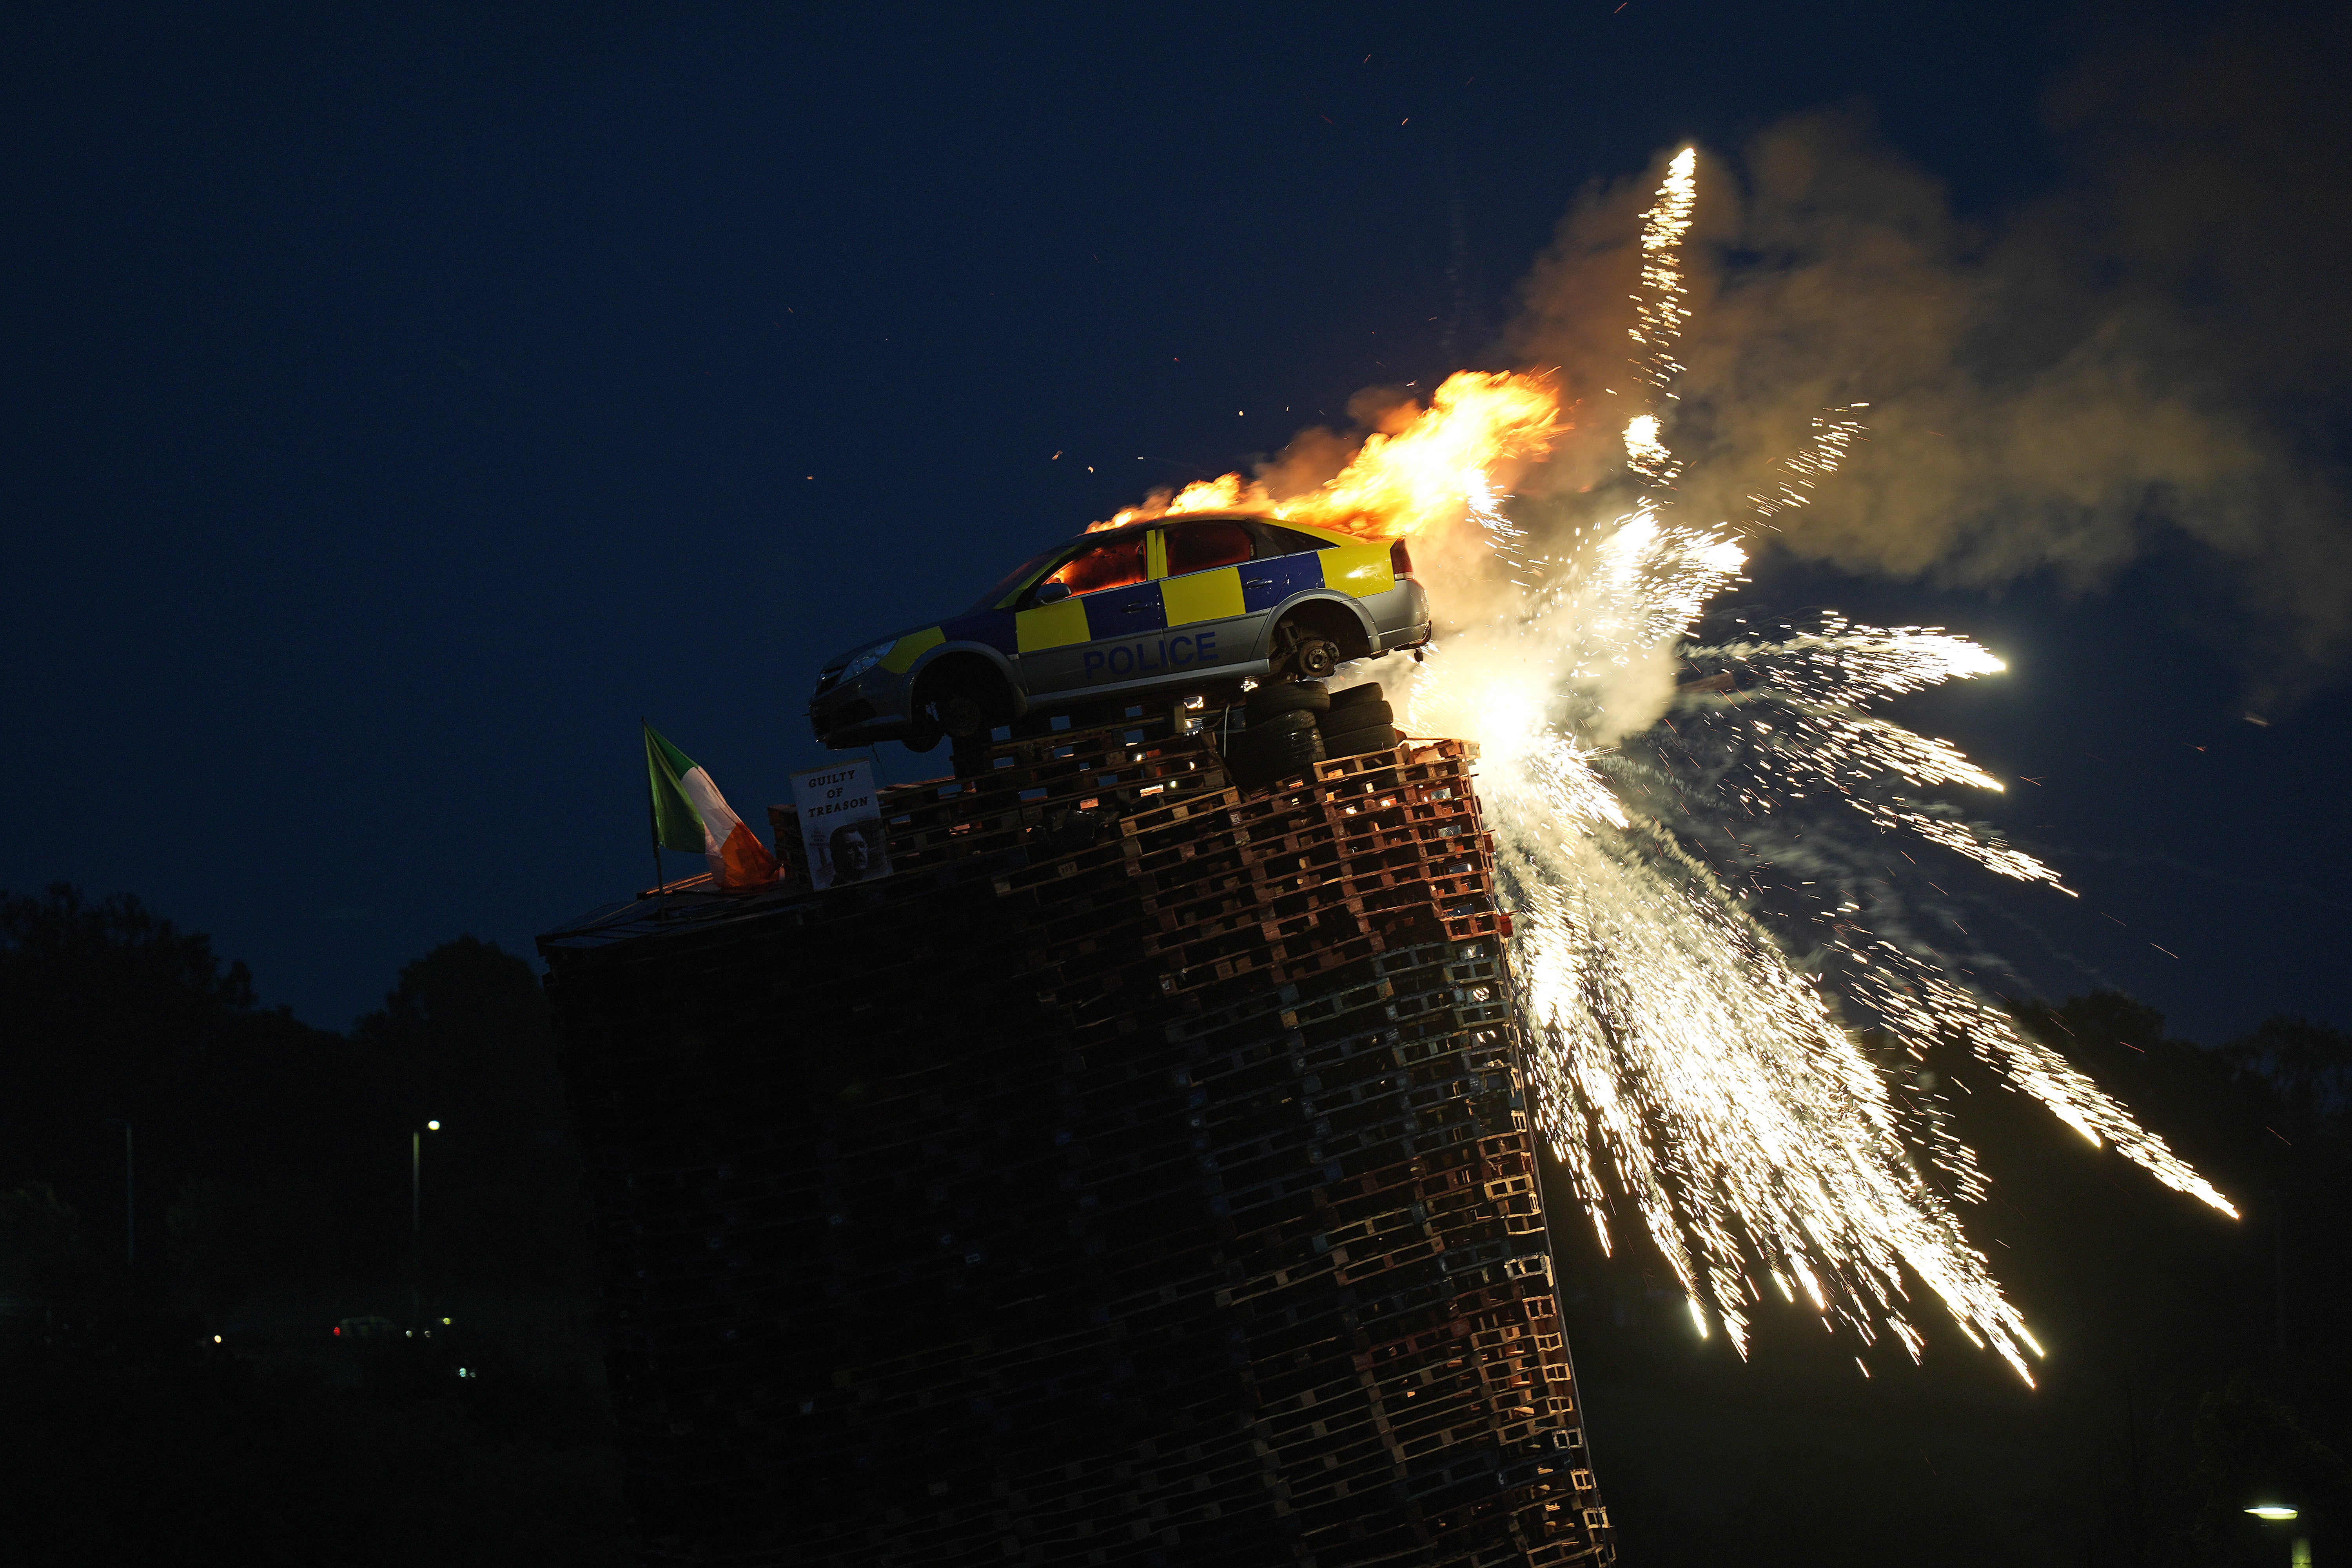 A mock police car is set alight on top of a bonfire in Moygashel near Dungannon, Co Tyrone, on Wednesday night (Niall Carson/PA)